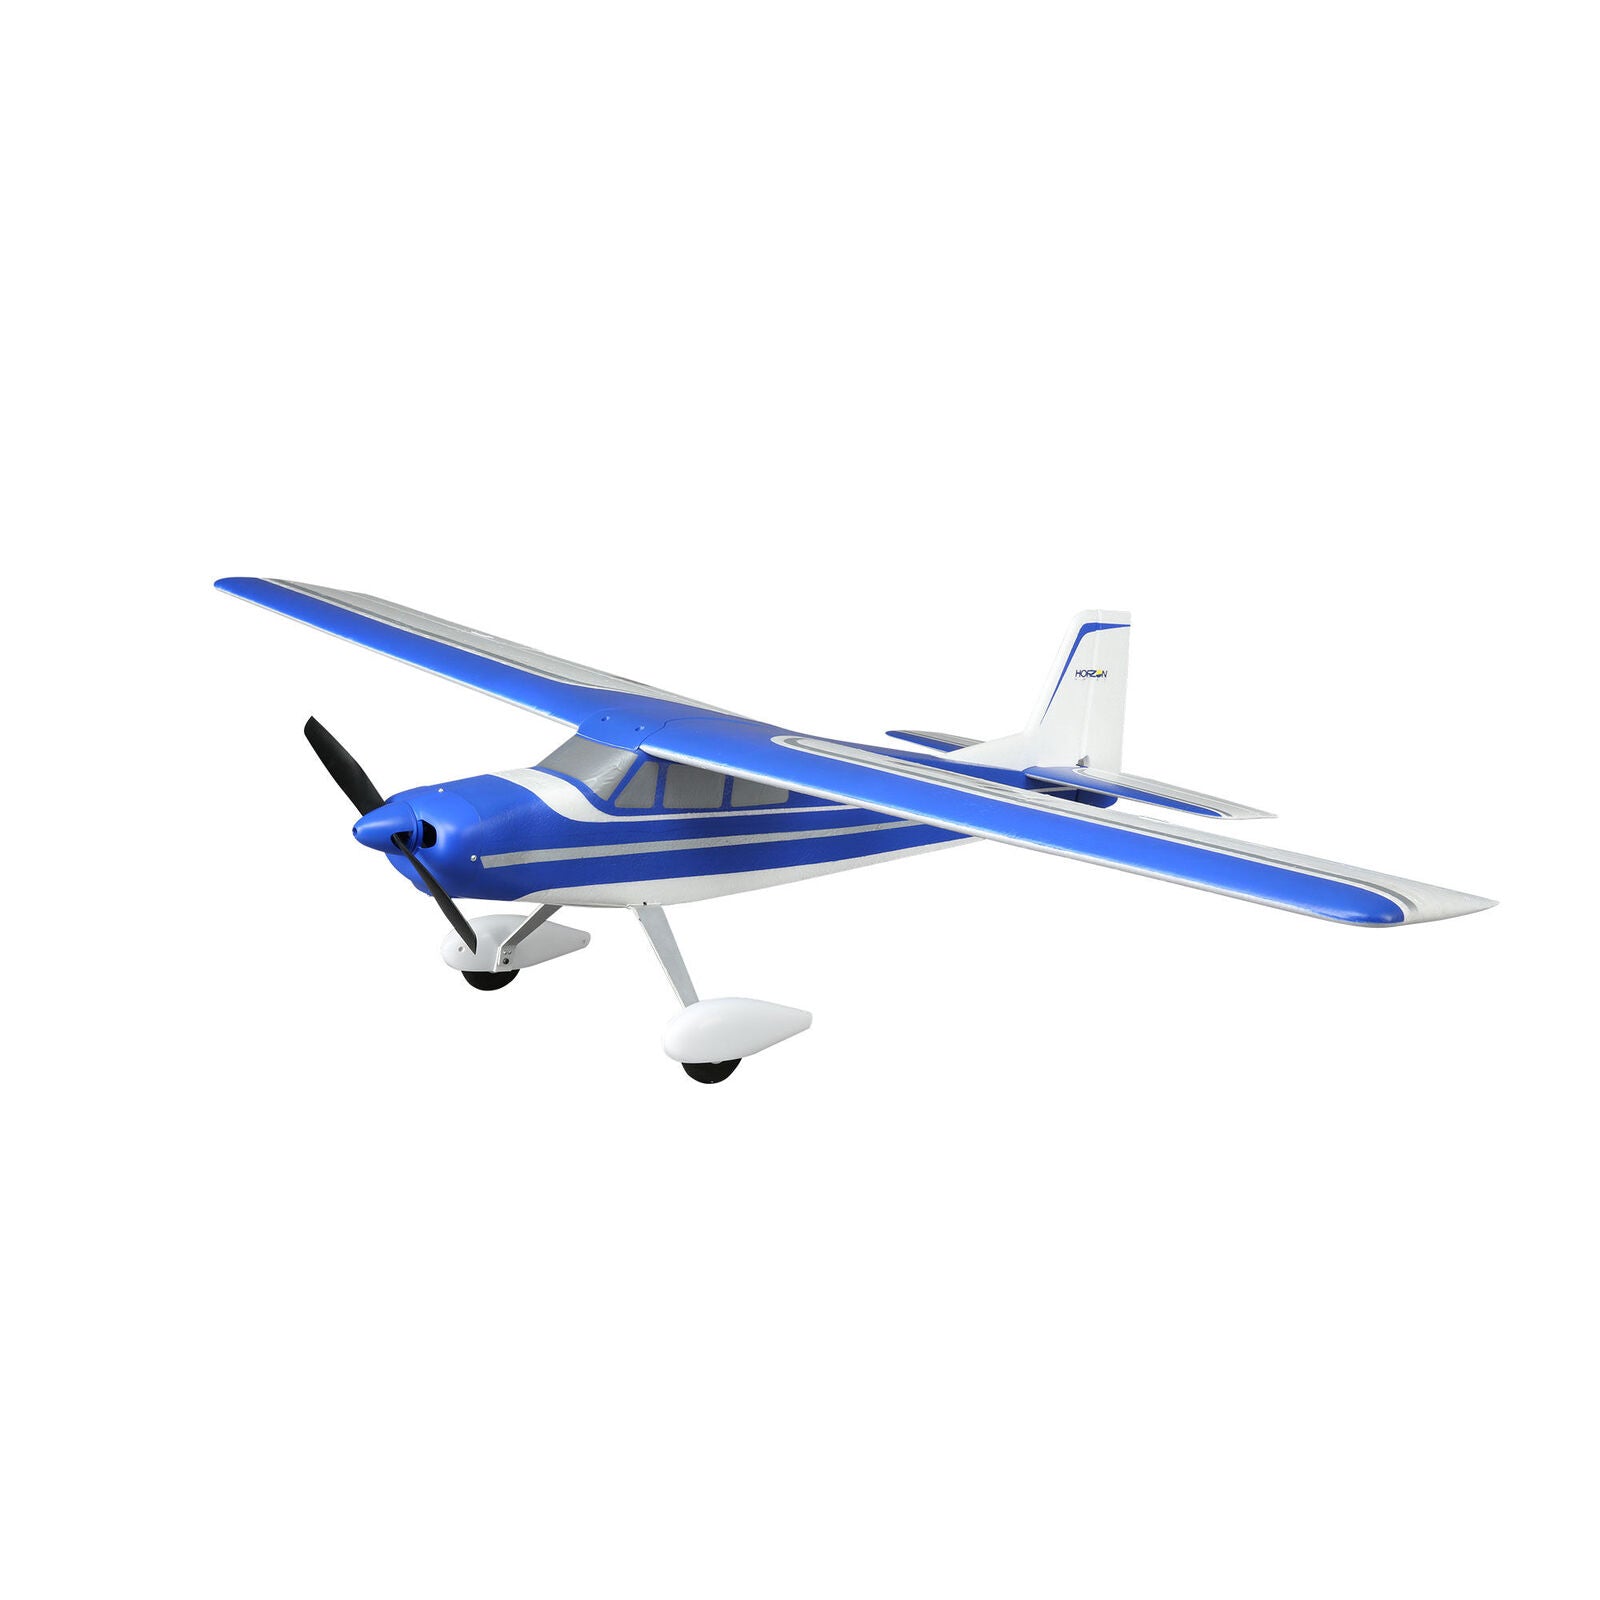 EFLITE Valiant 1.3m BNF Basic with AS3X and SAFE Select